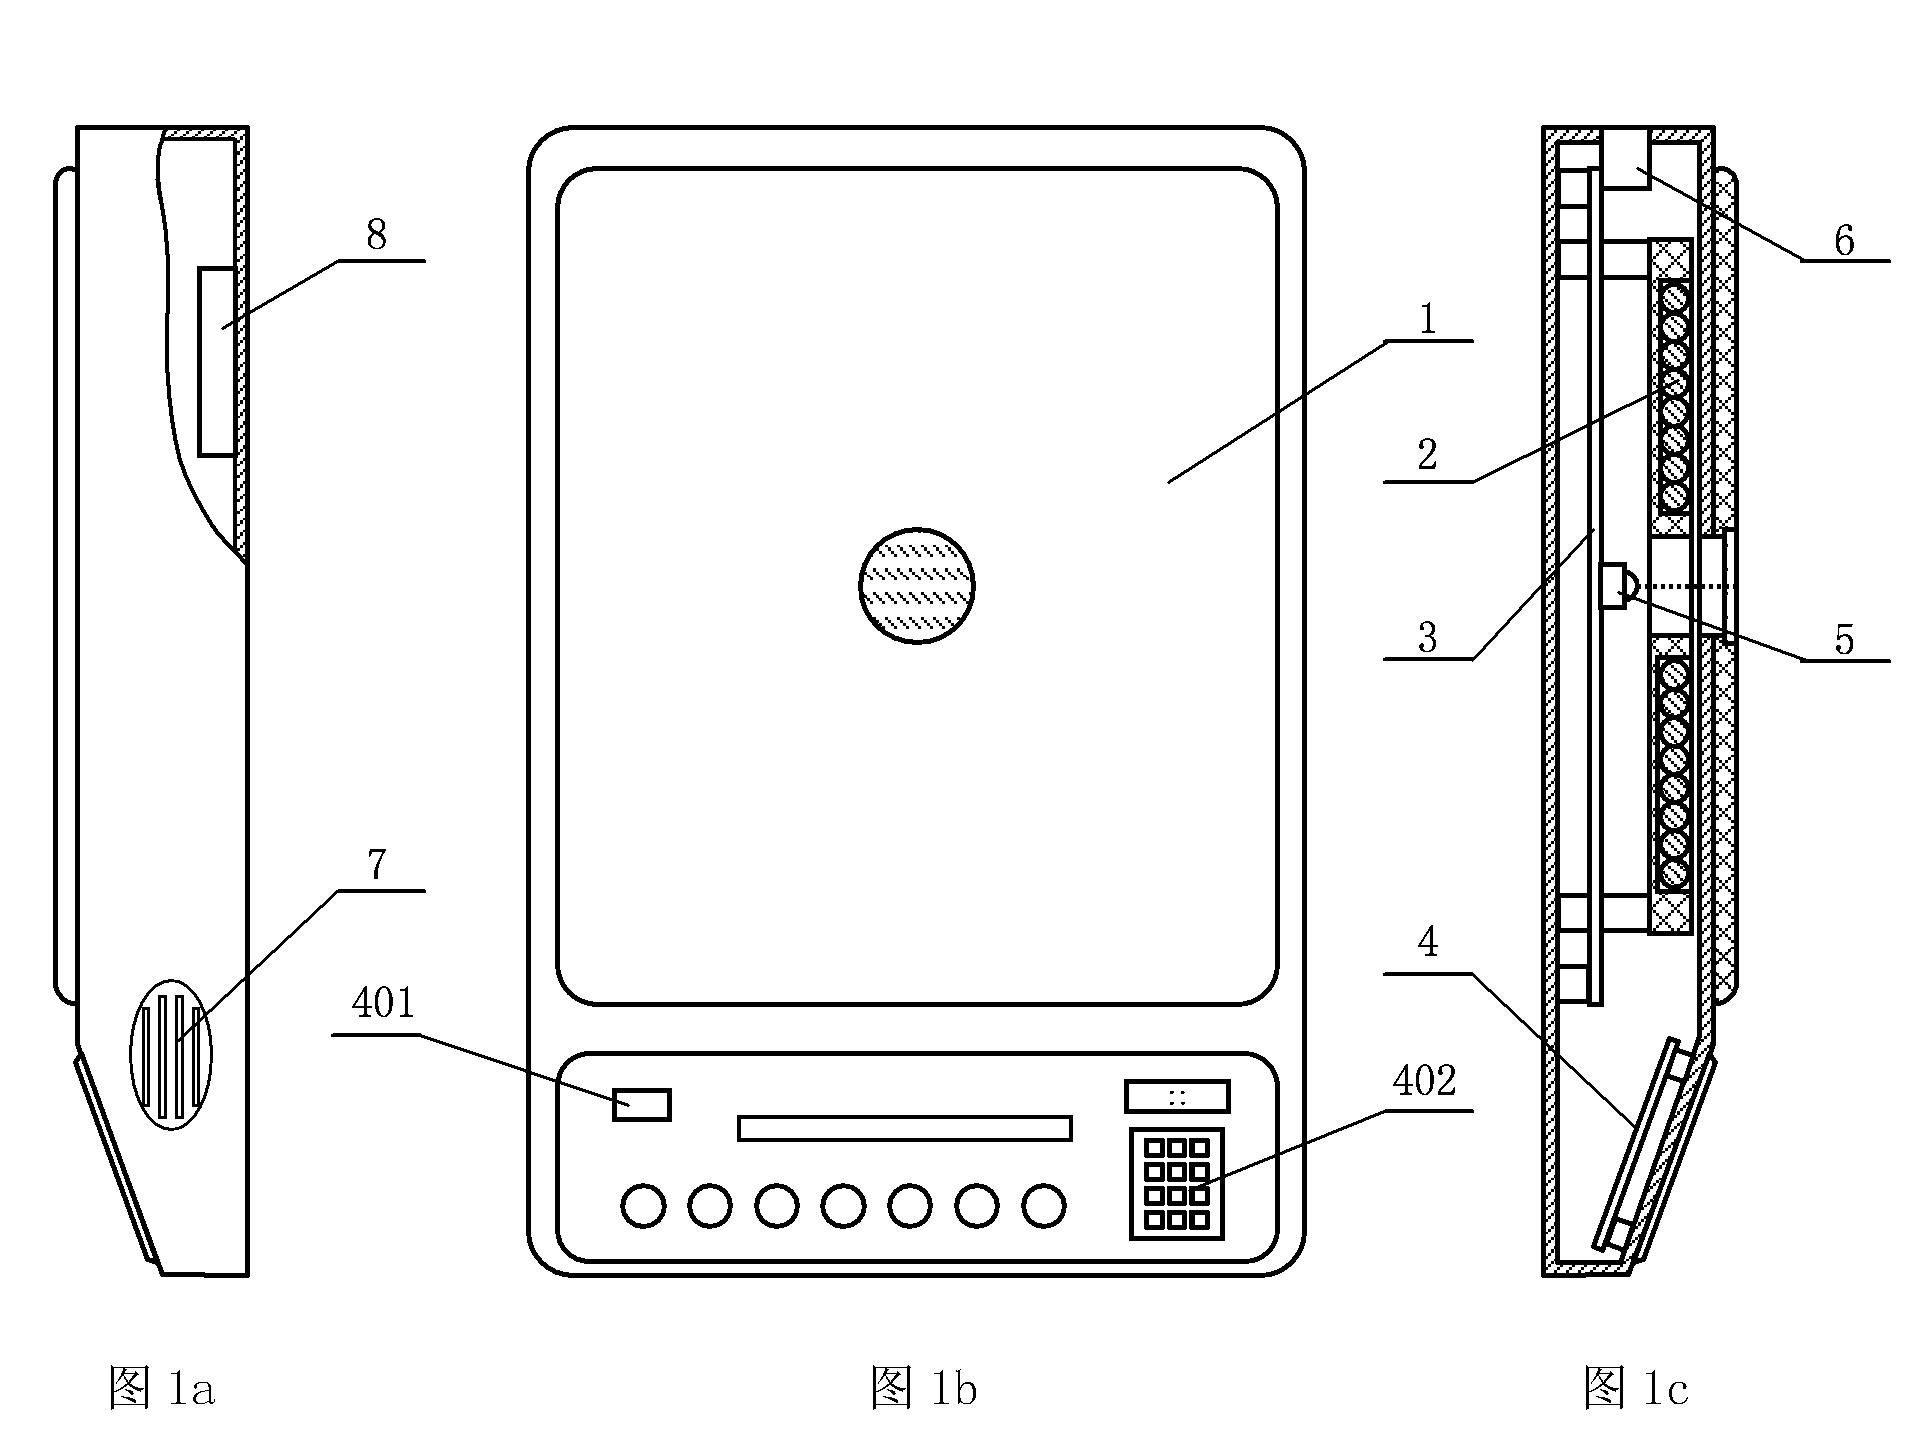 Intelligent cooker interacting with human in cooking and working method